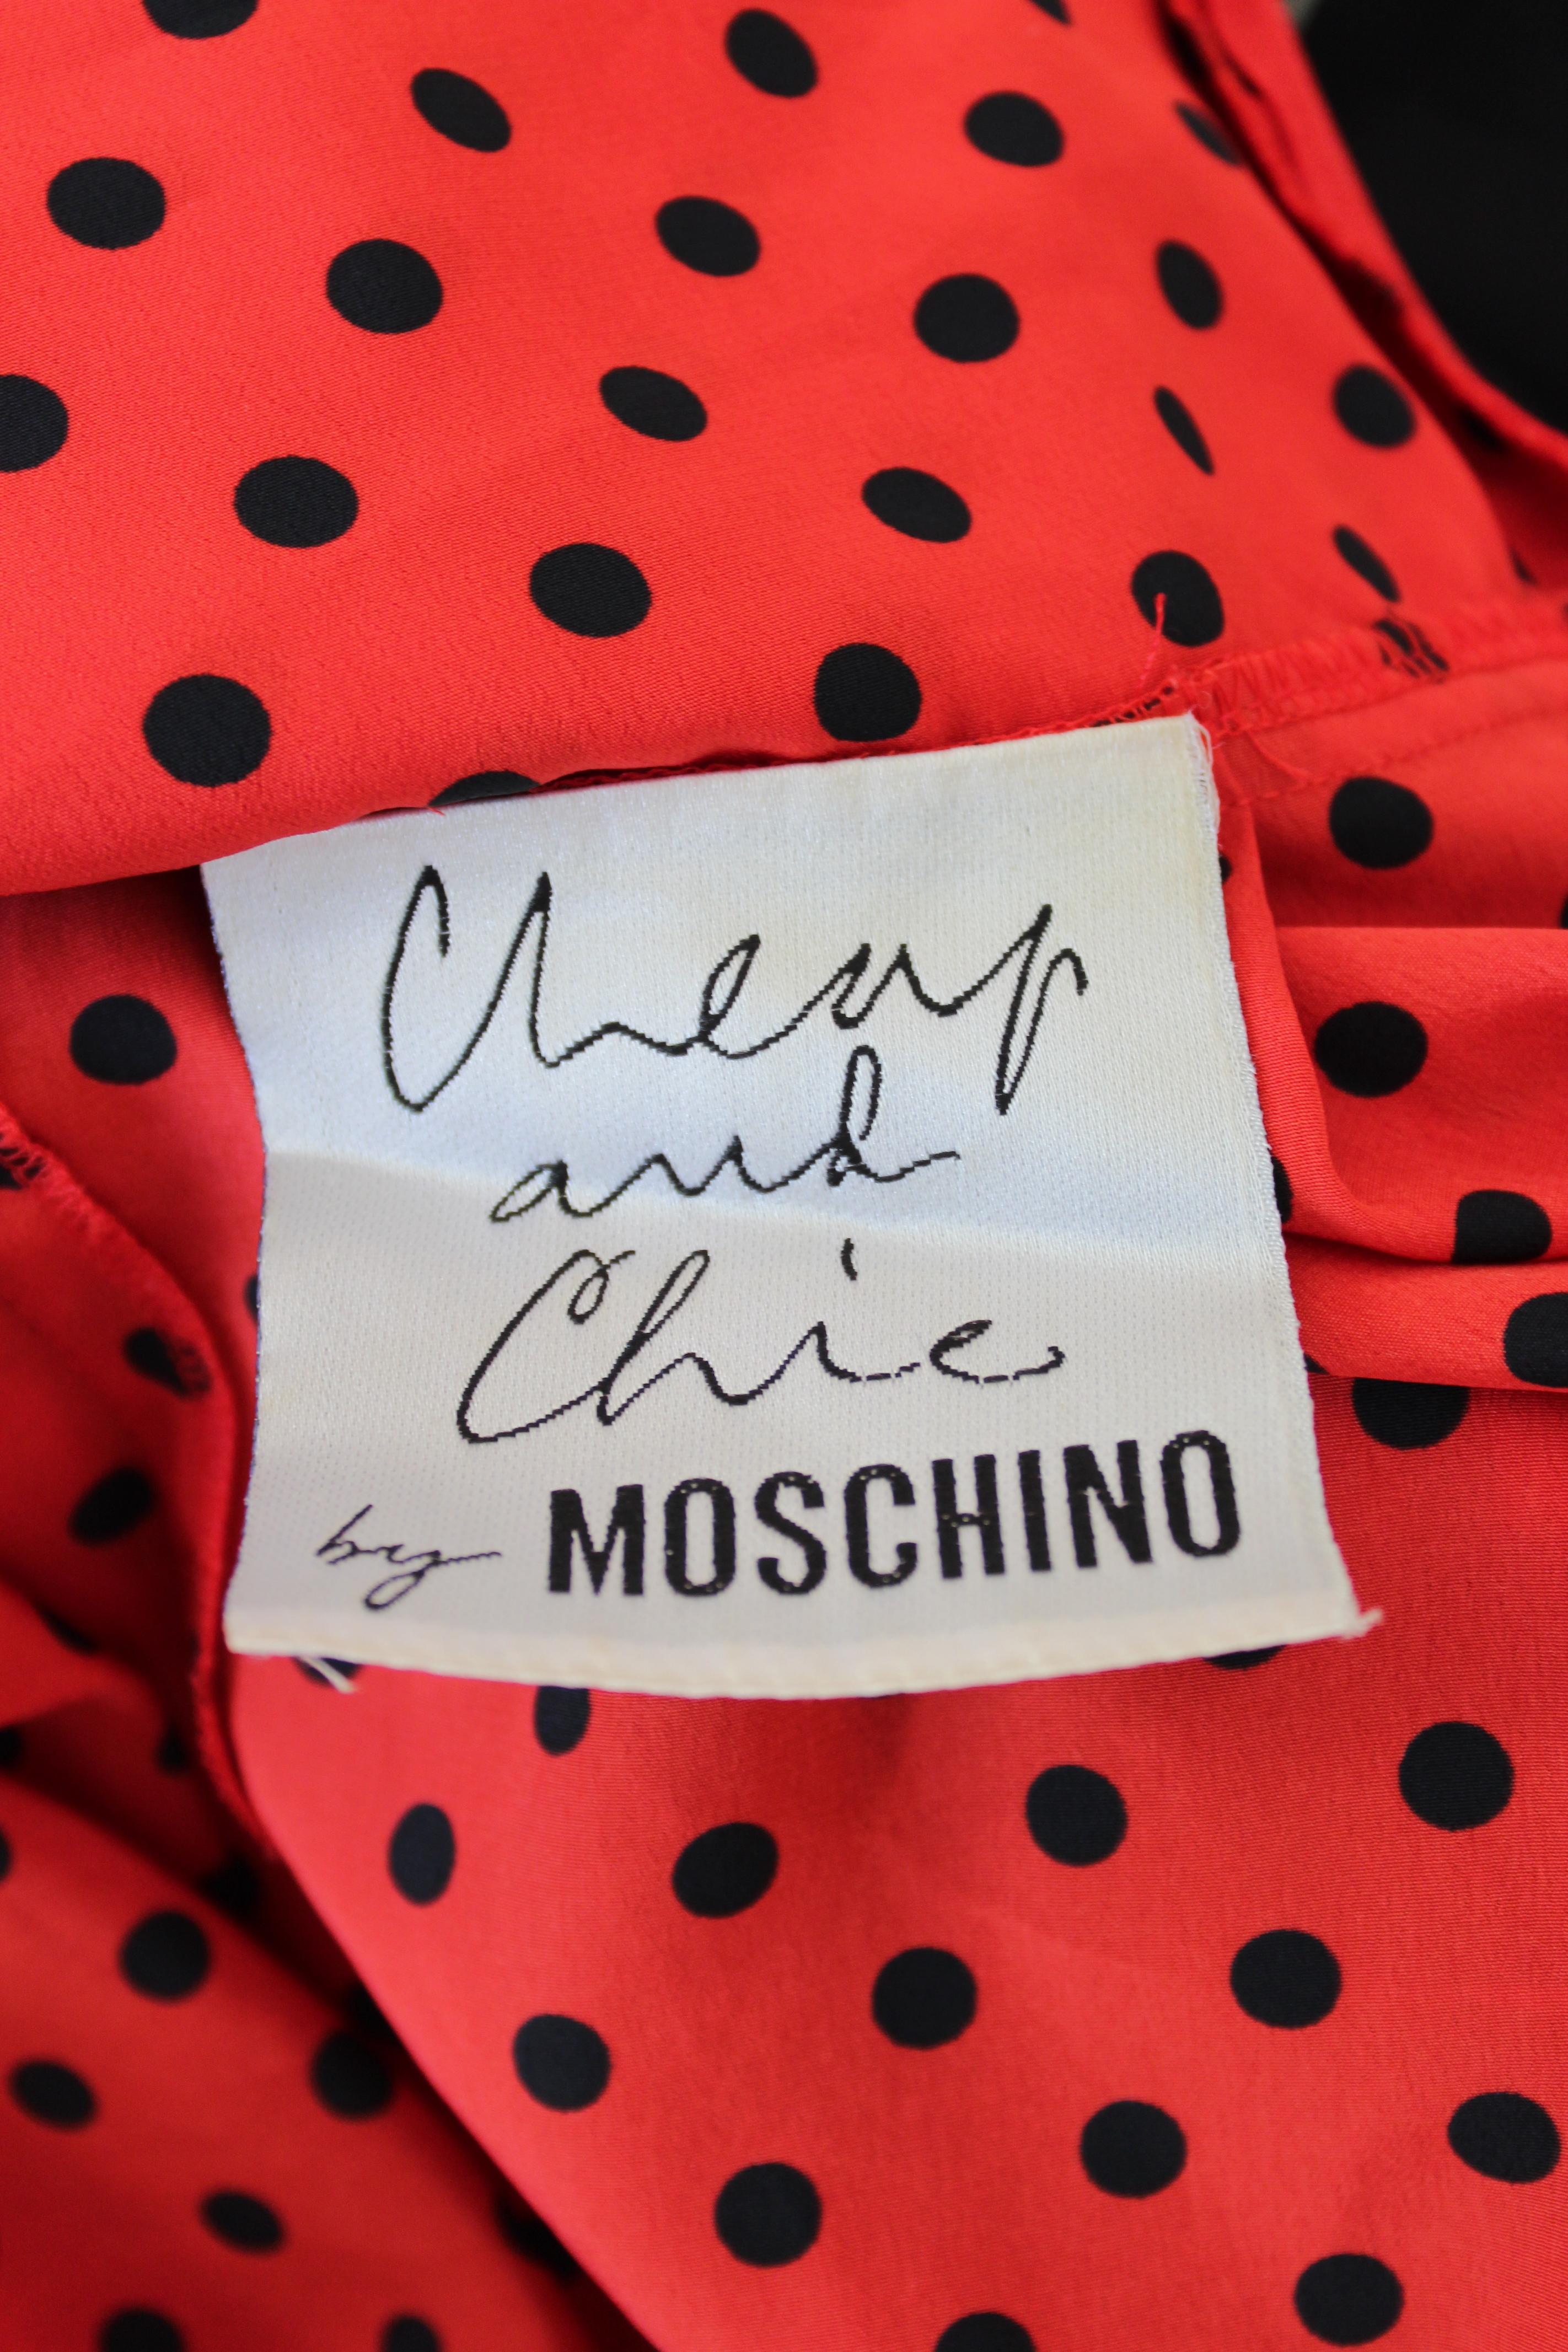 Moschino Red Black Polka Dot Cocktail Jacket and Dress Set 1990s Vintage 7